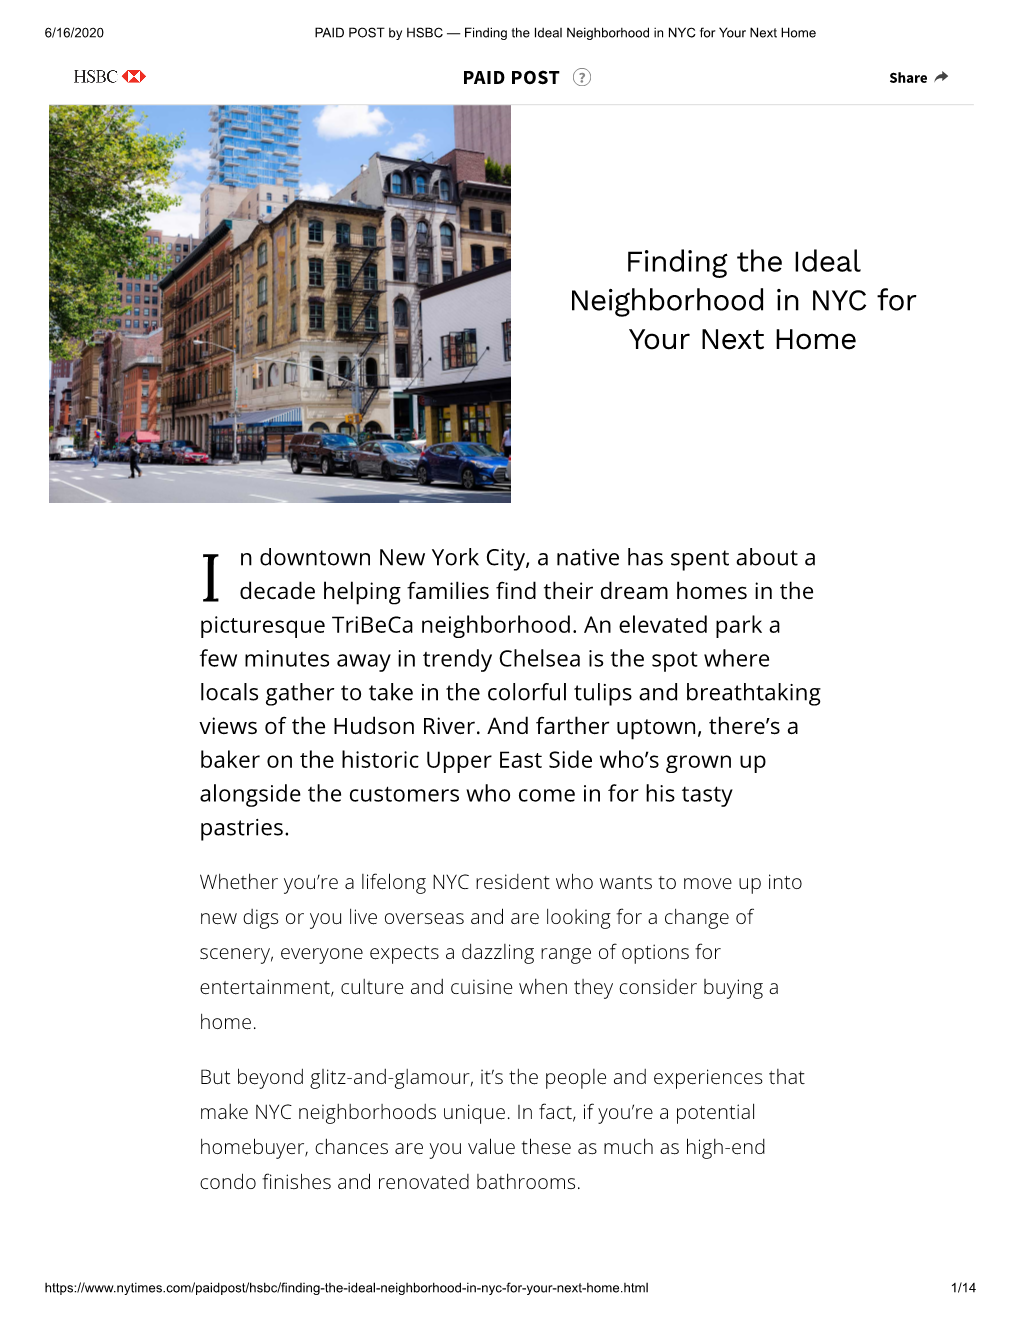 Finding the Ideal Neighborhood in NYC for Your Next Home